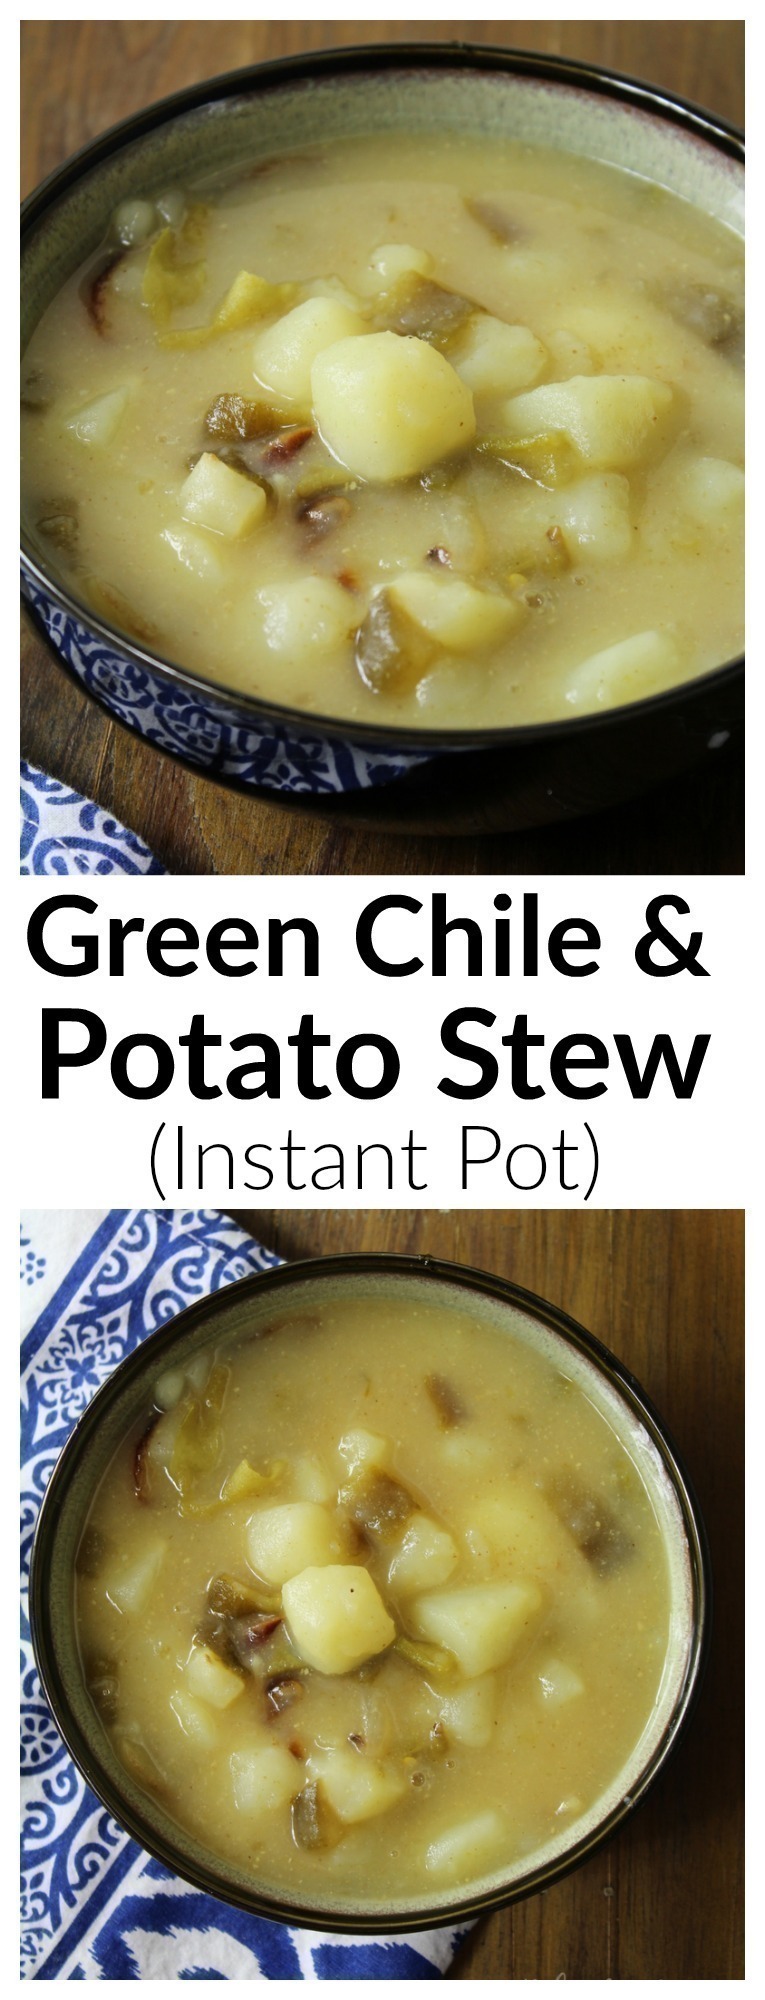 A meatless green chile and potato stew that's filling, flavorful and incredibly easy to make in your Instant Pot.